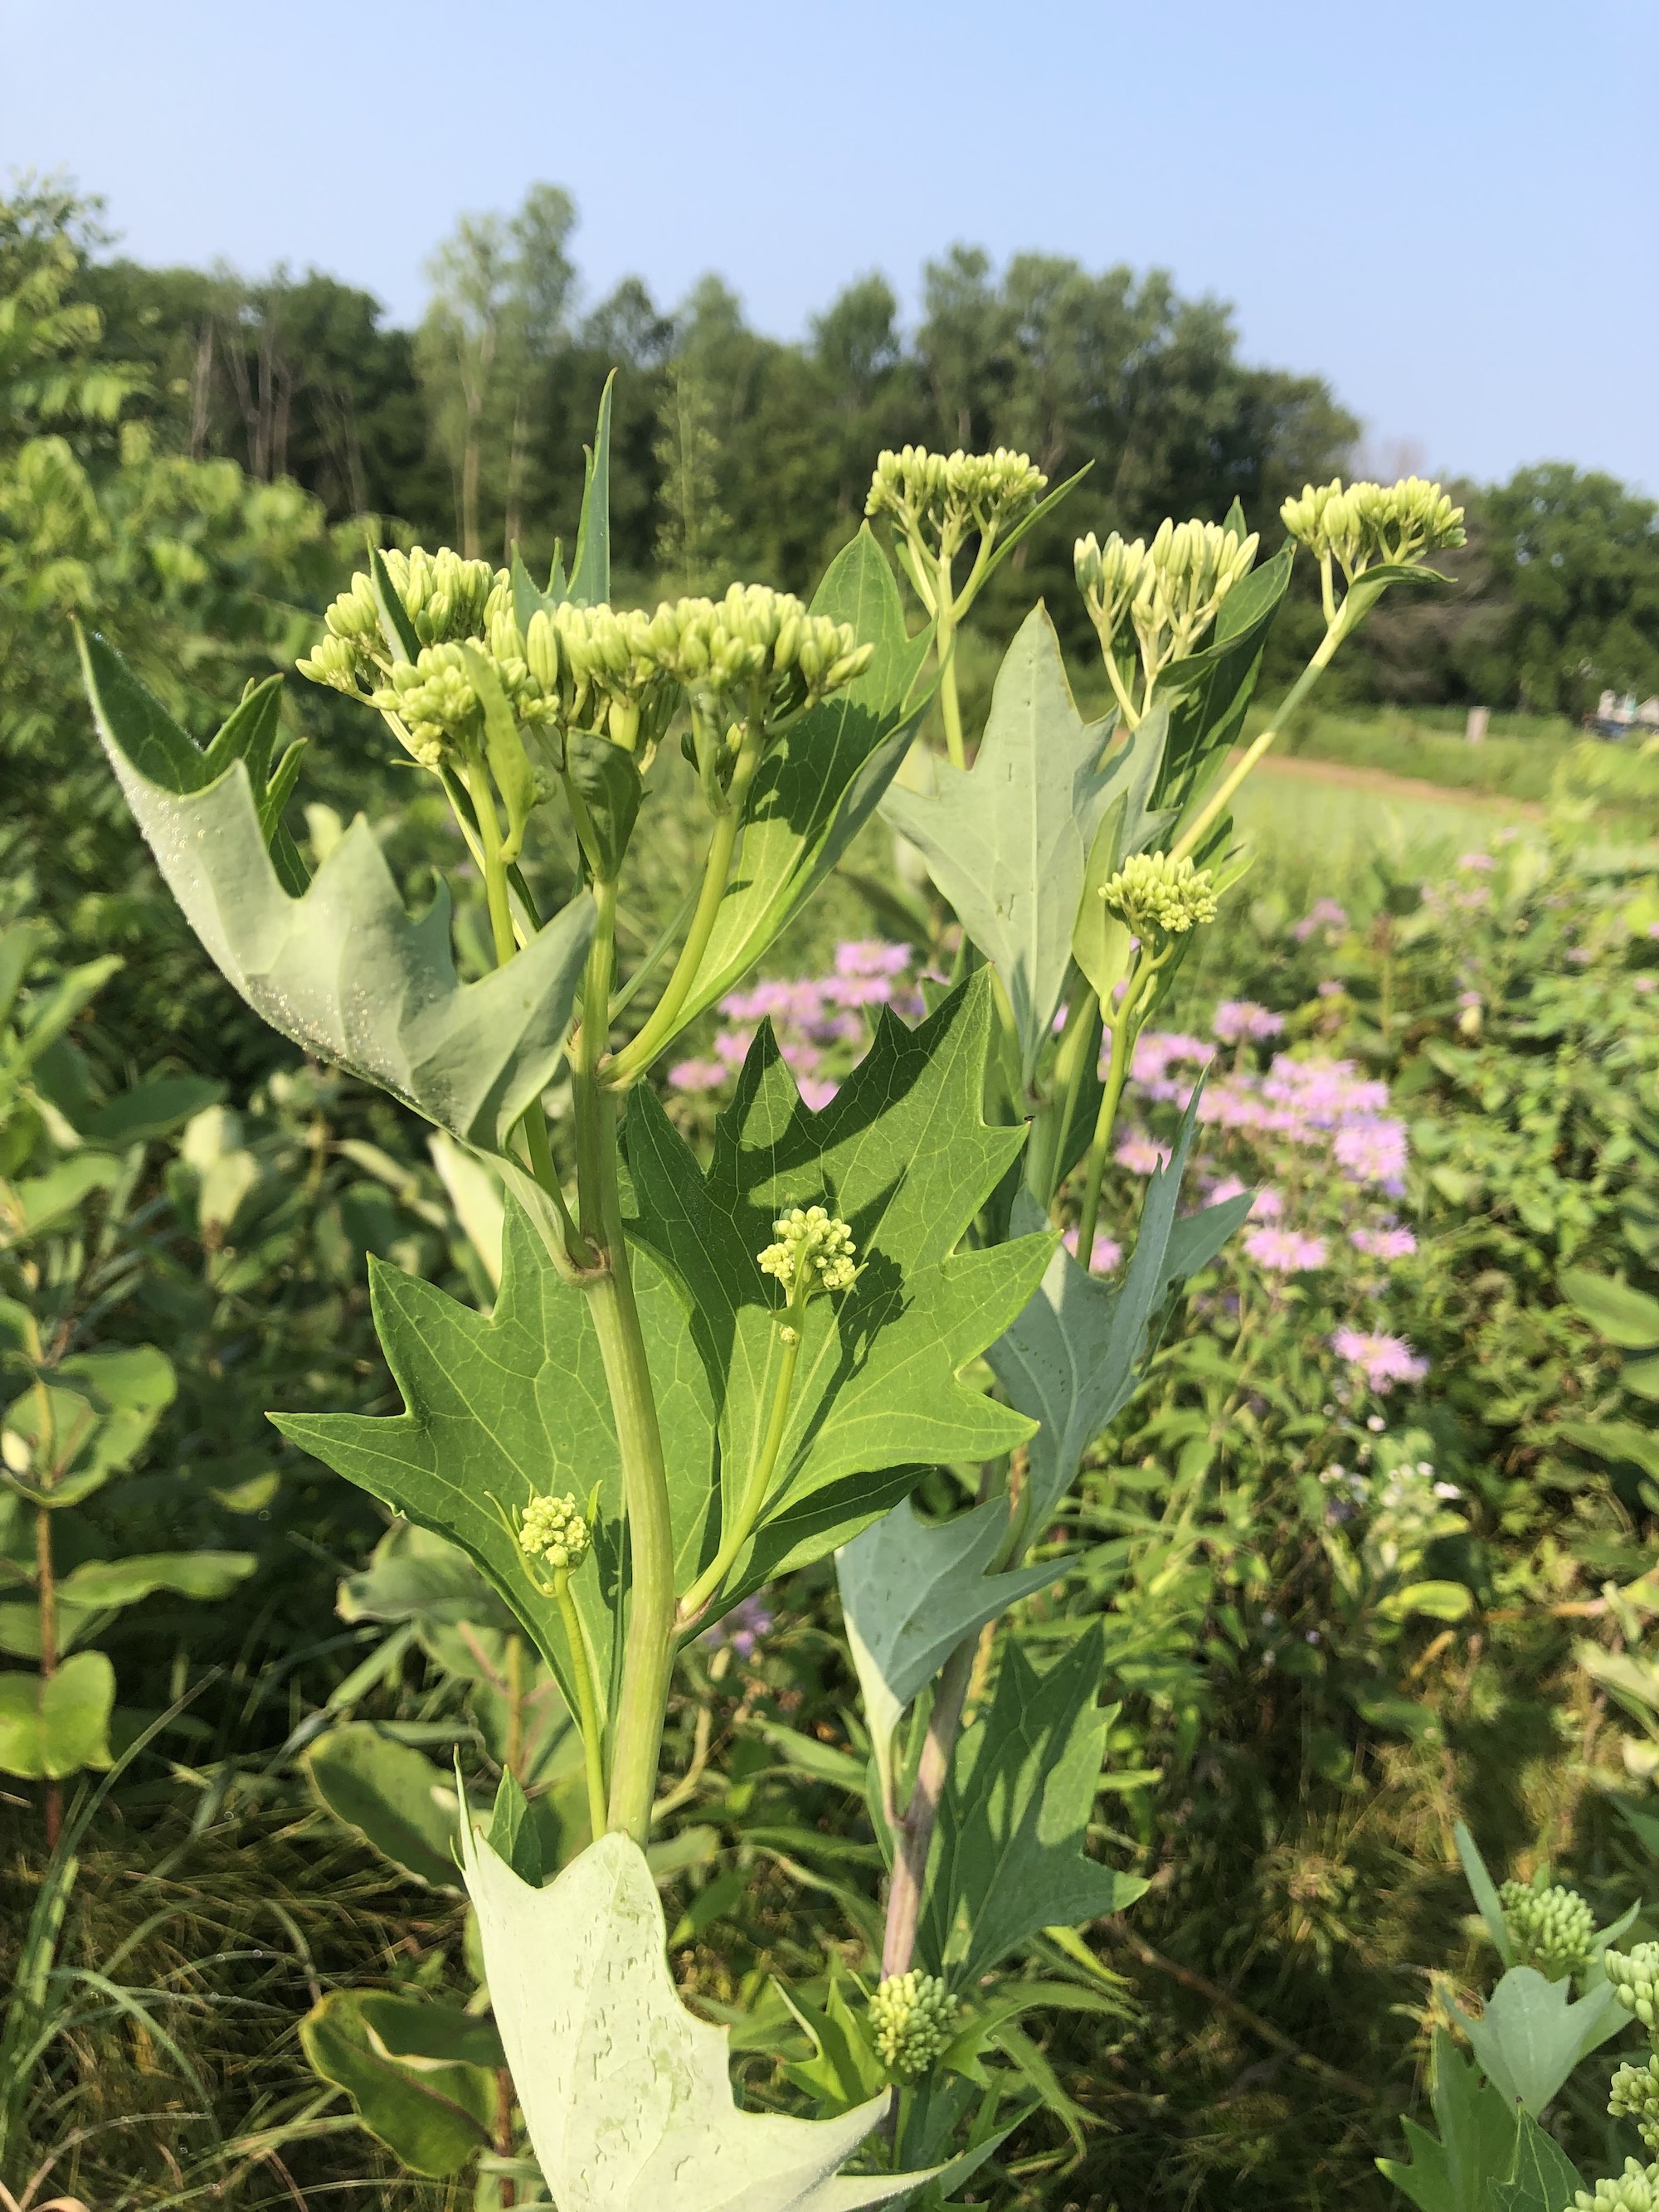 Pale Indian Plantain in Marion Dunn Prairie in Madison, Wisconsin on July 24, 2019.